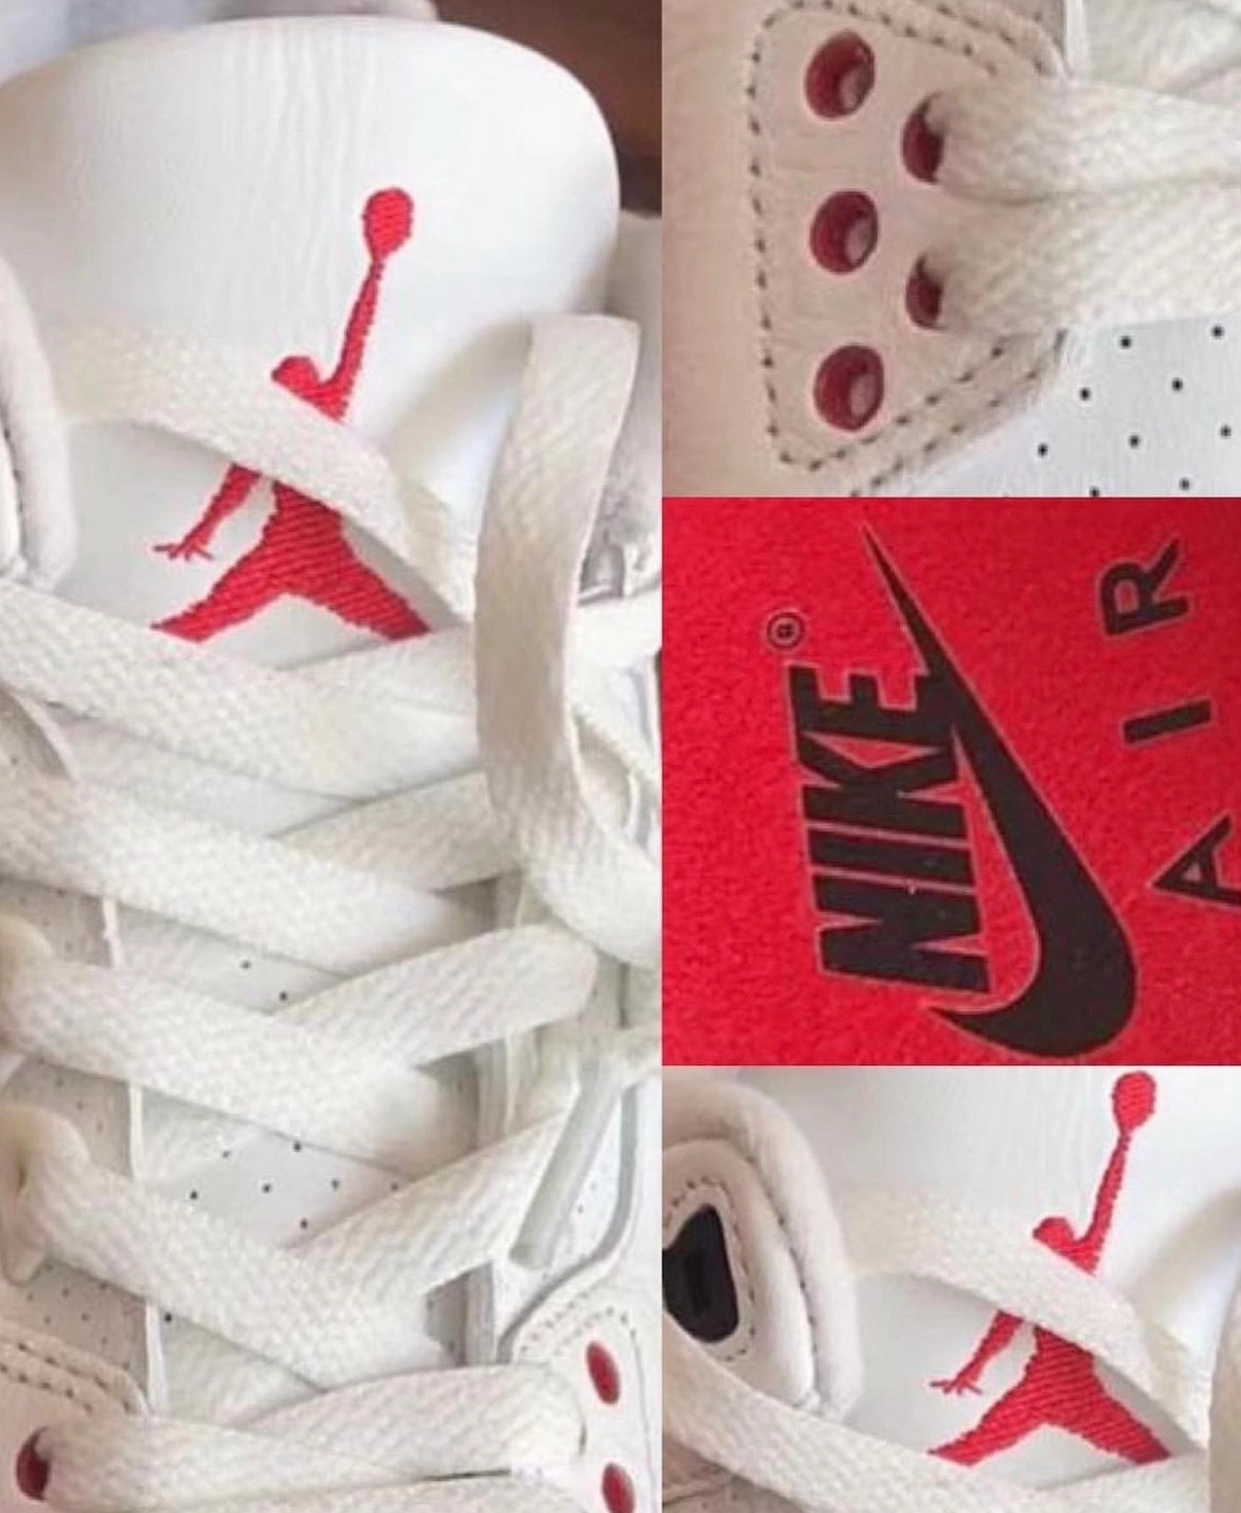 Air Jordan 3 White Cement Reimagined DN3707-100 Release Date Top Insole